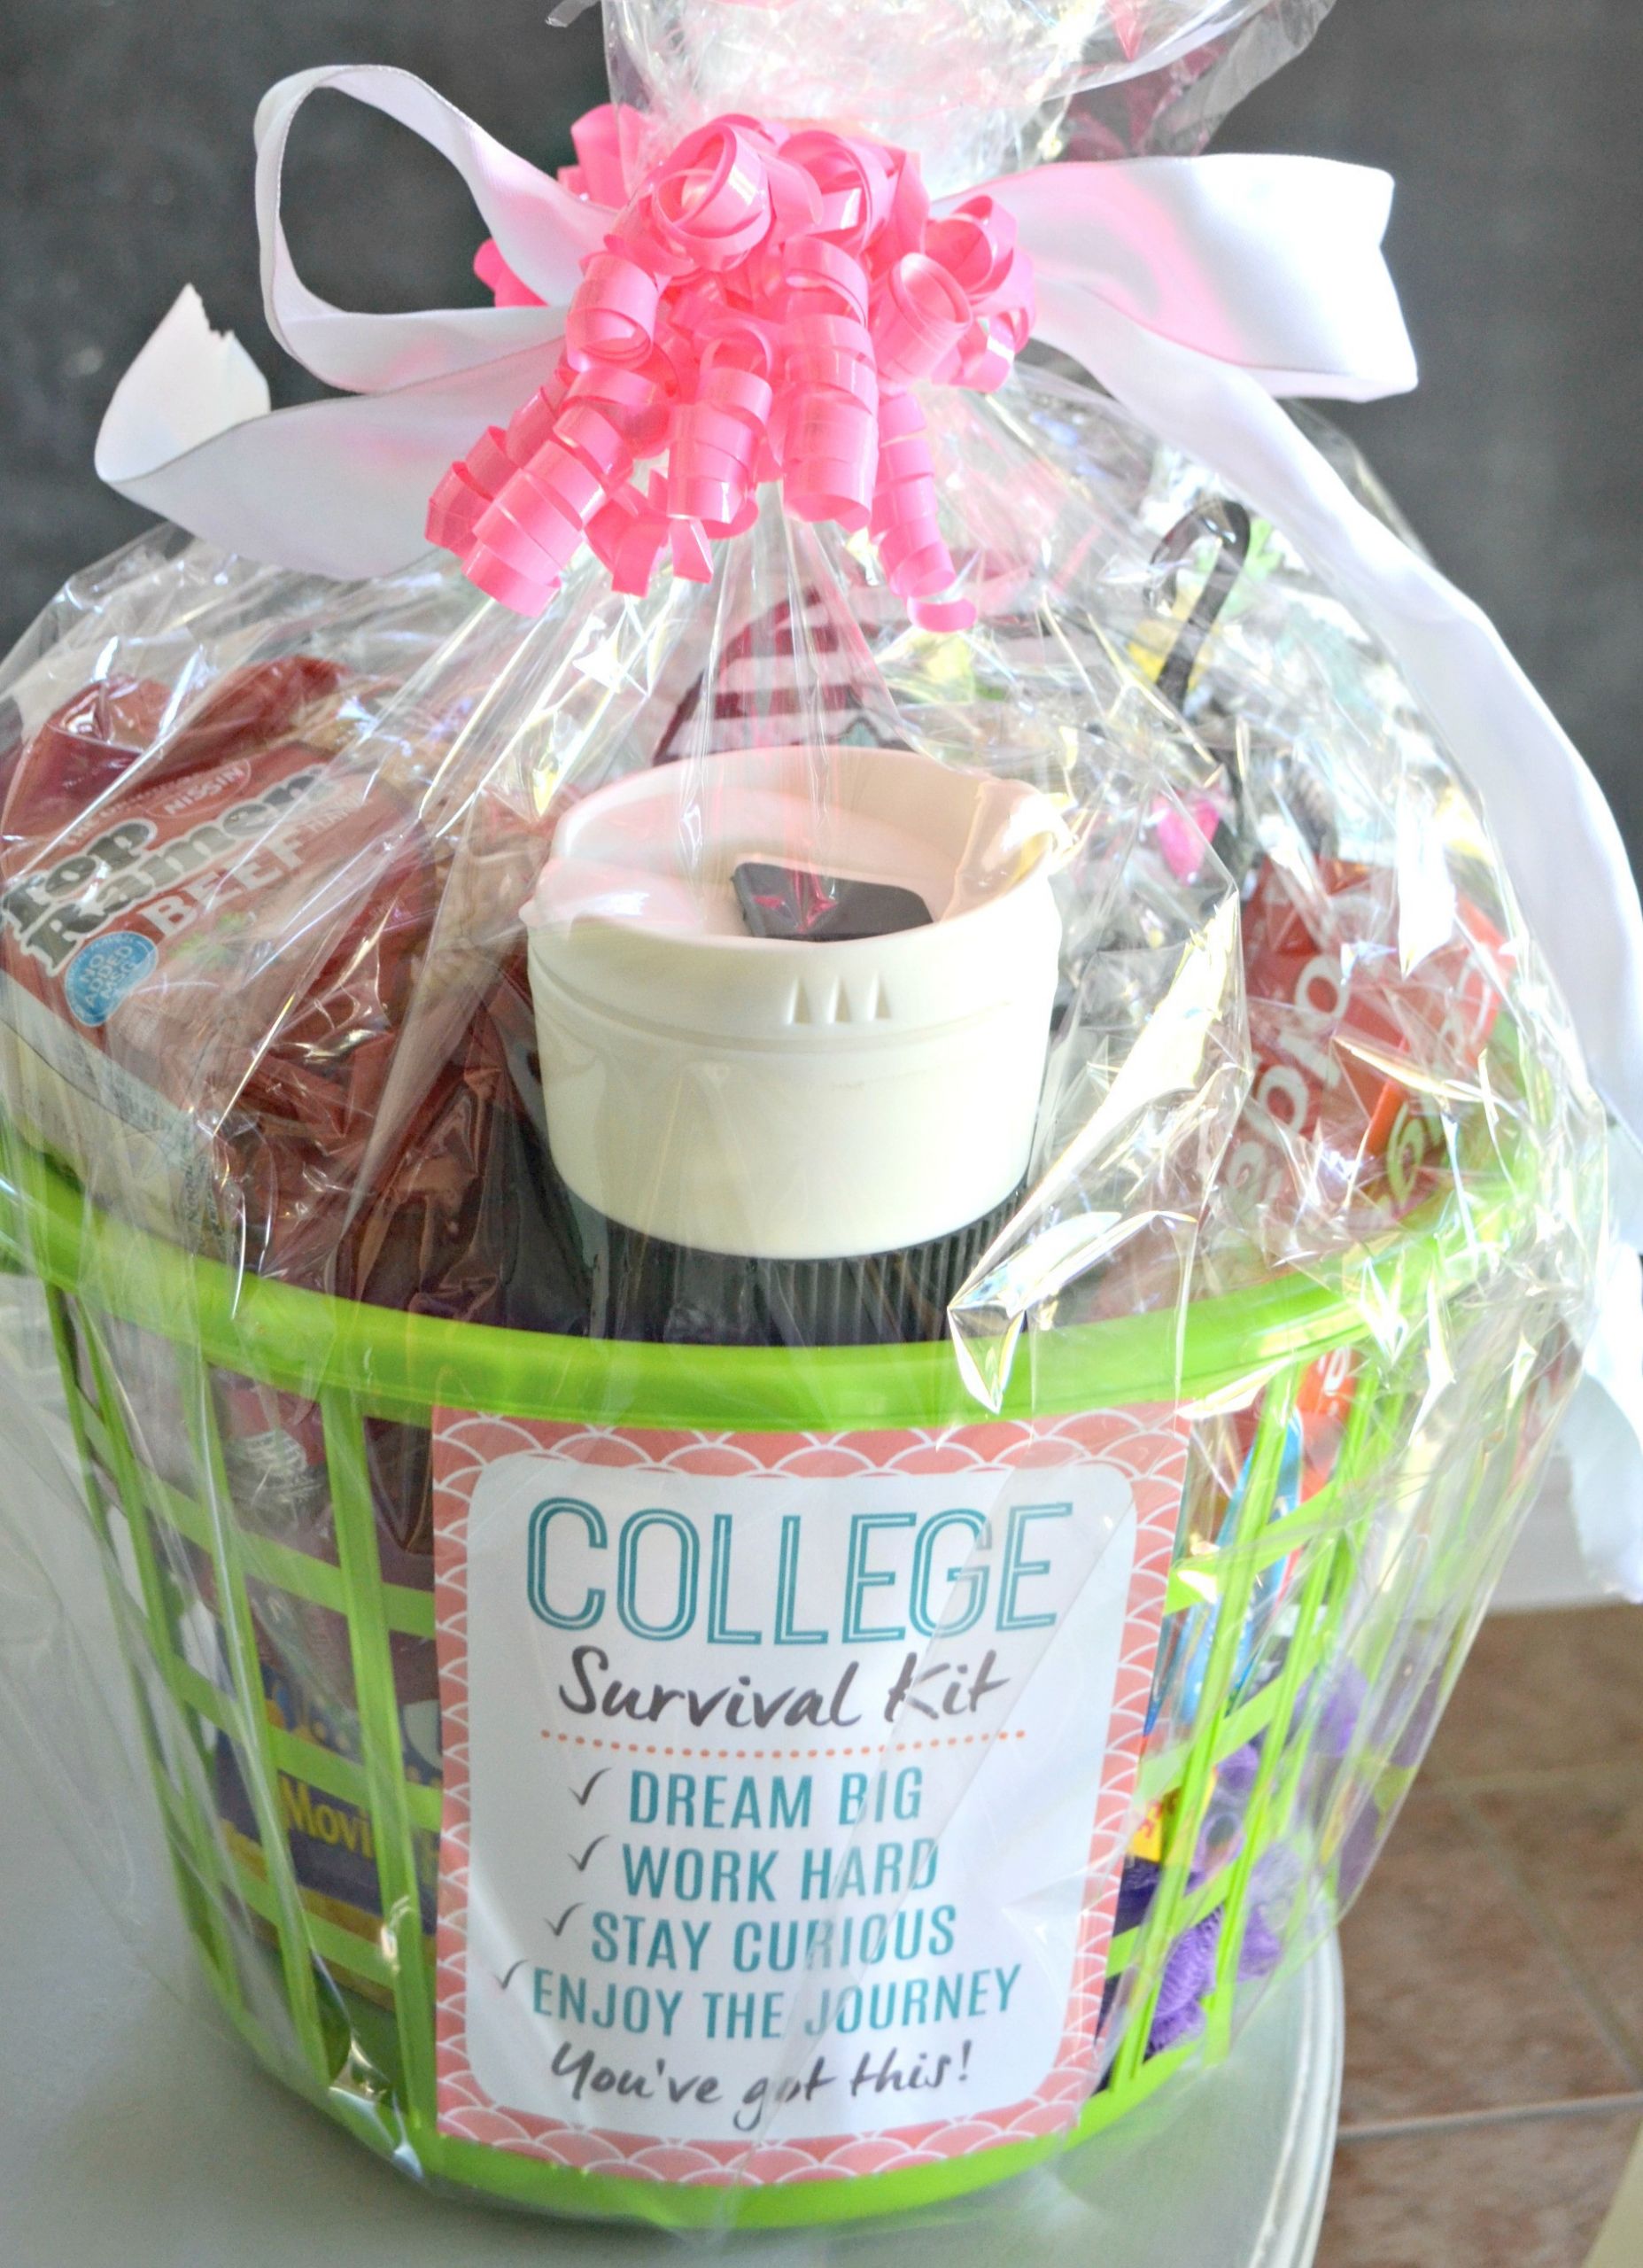 Off To College Gift Basket Ideas
 Dollar Tree DIY College Survival Kit & Free Printable Card